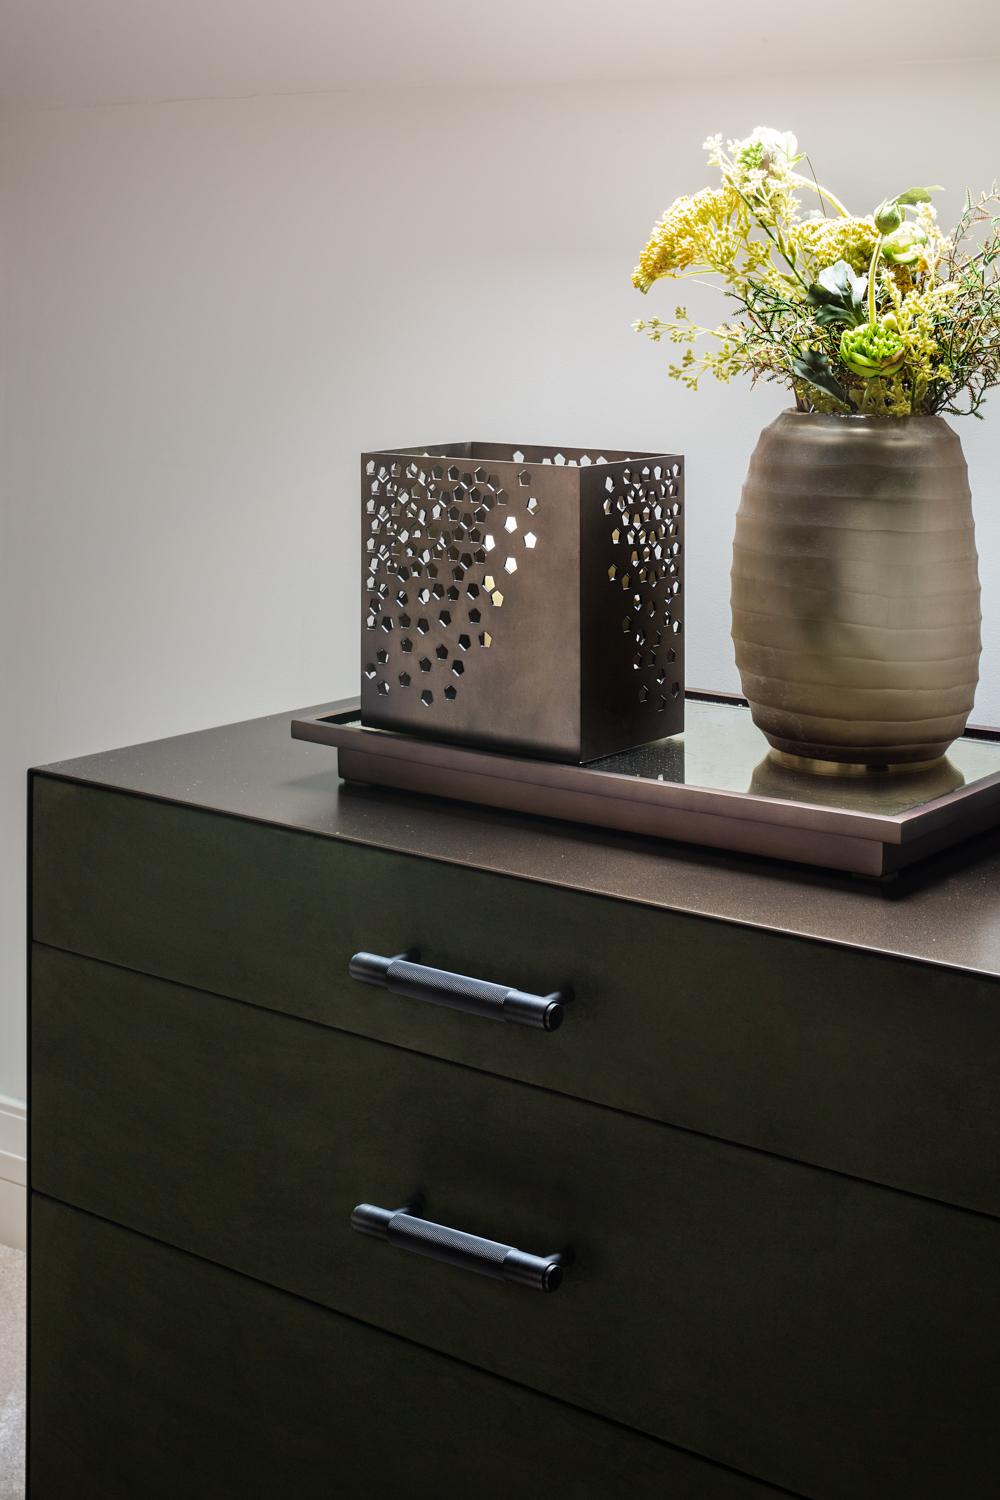 Behold! Feast your eyes upon the architectural wonder that exudes a daring interplay of materials, textures, and razor-sharp contours. This masterpiece demands attention while gracefully complementing its environs. The Ercole Chest of Drawers, a